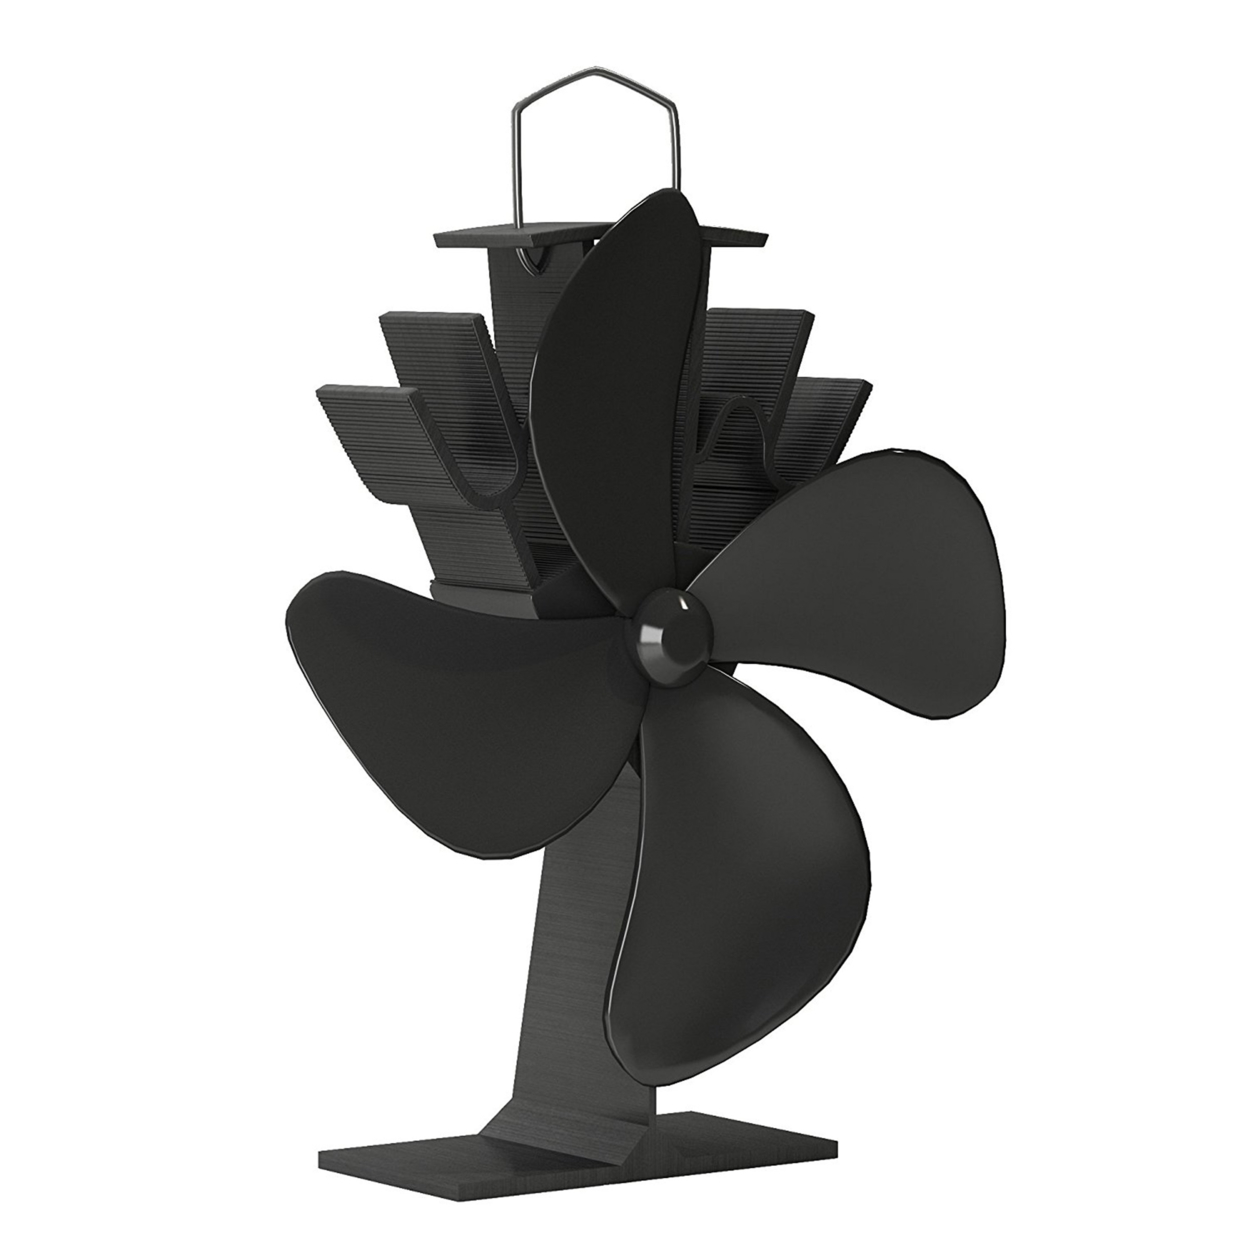 Stove Fan Heat Powered Fan For Wood Burning Stoves Or Fireplaces-Quiet And Low Maintenance